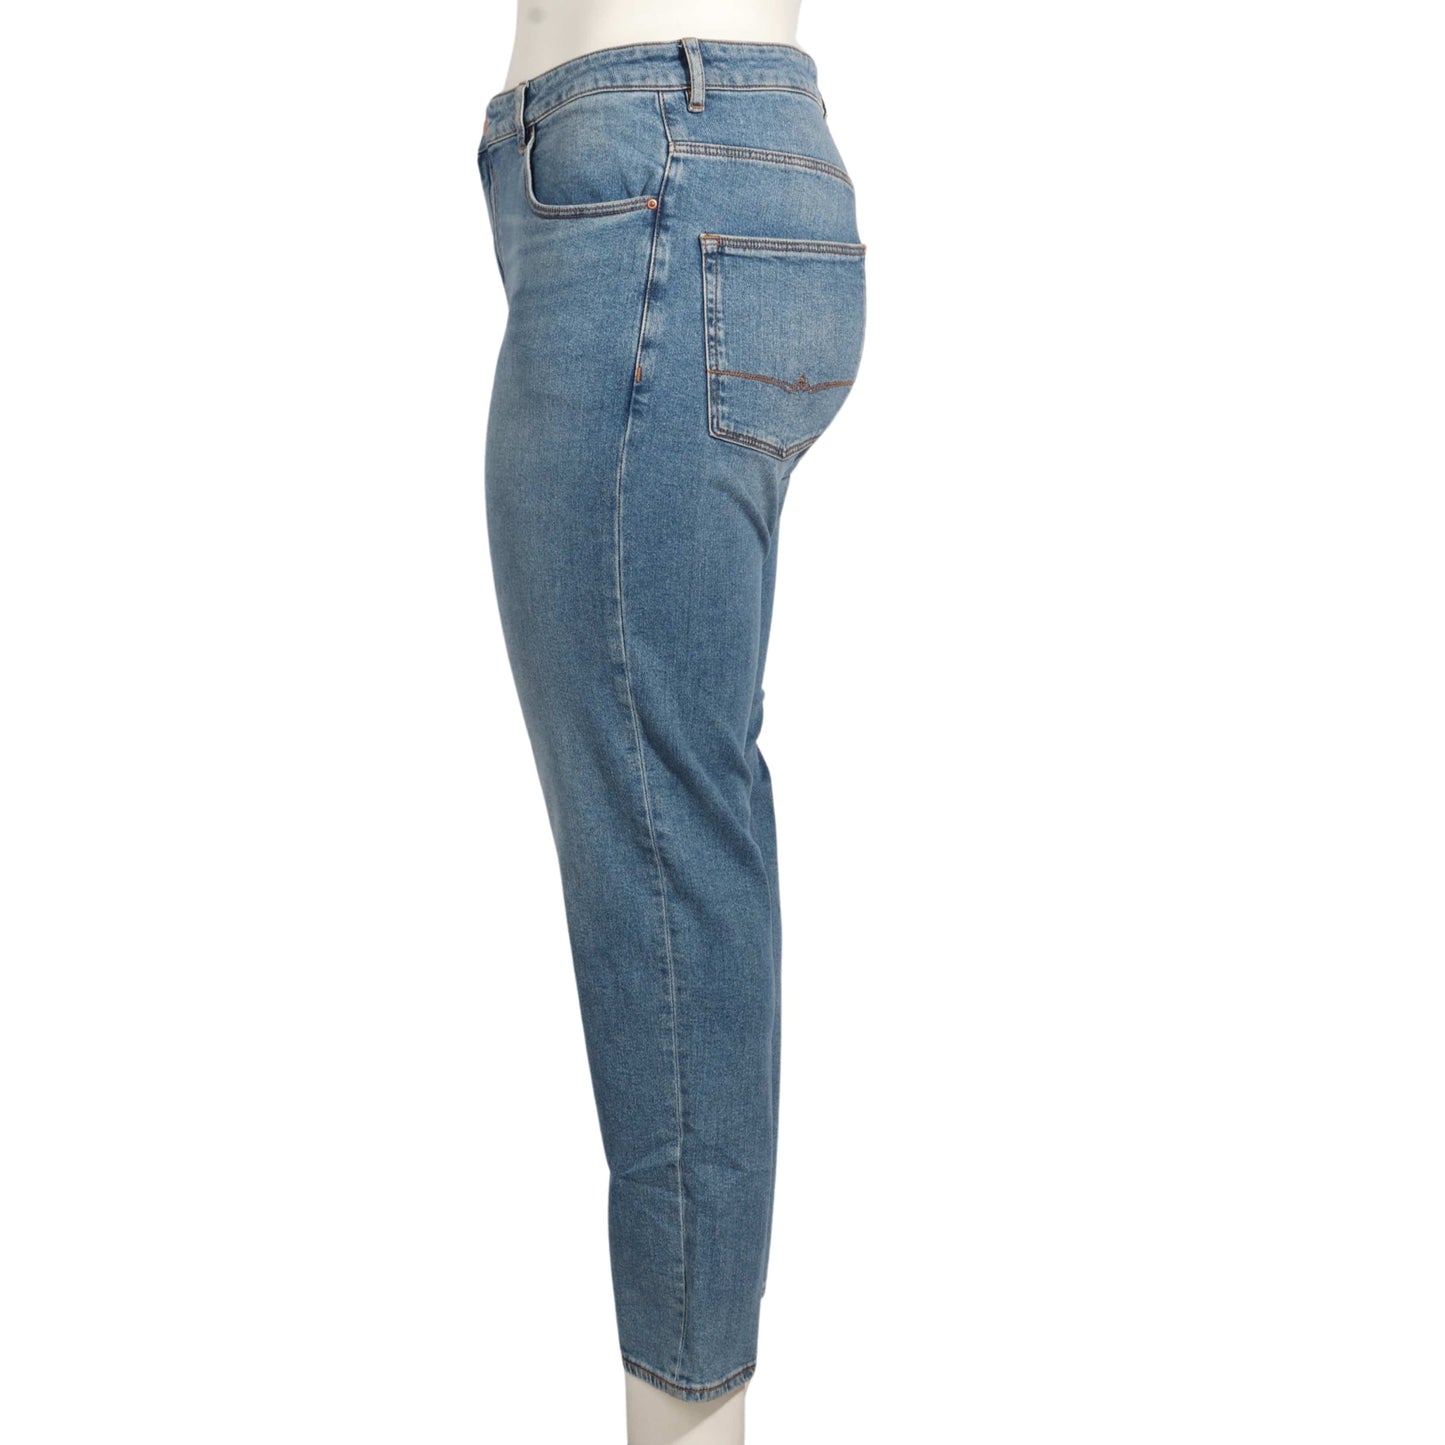 ASOS Womens Bottoms ASOS - Jeans Belt Loop With Pockets